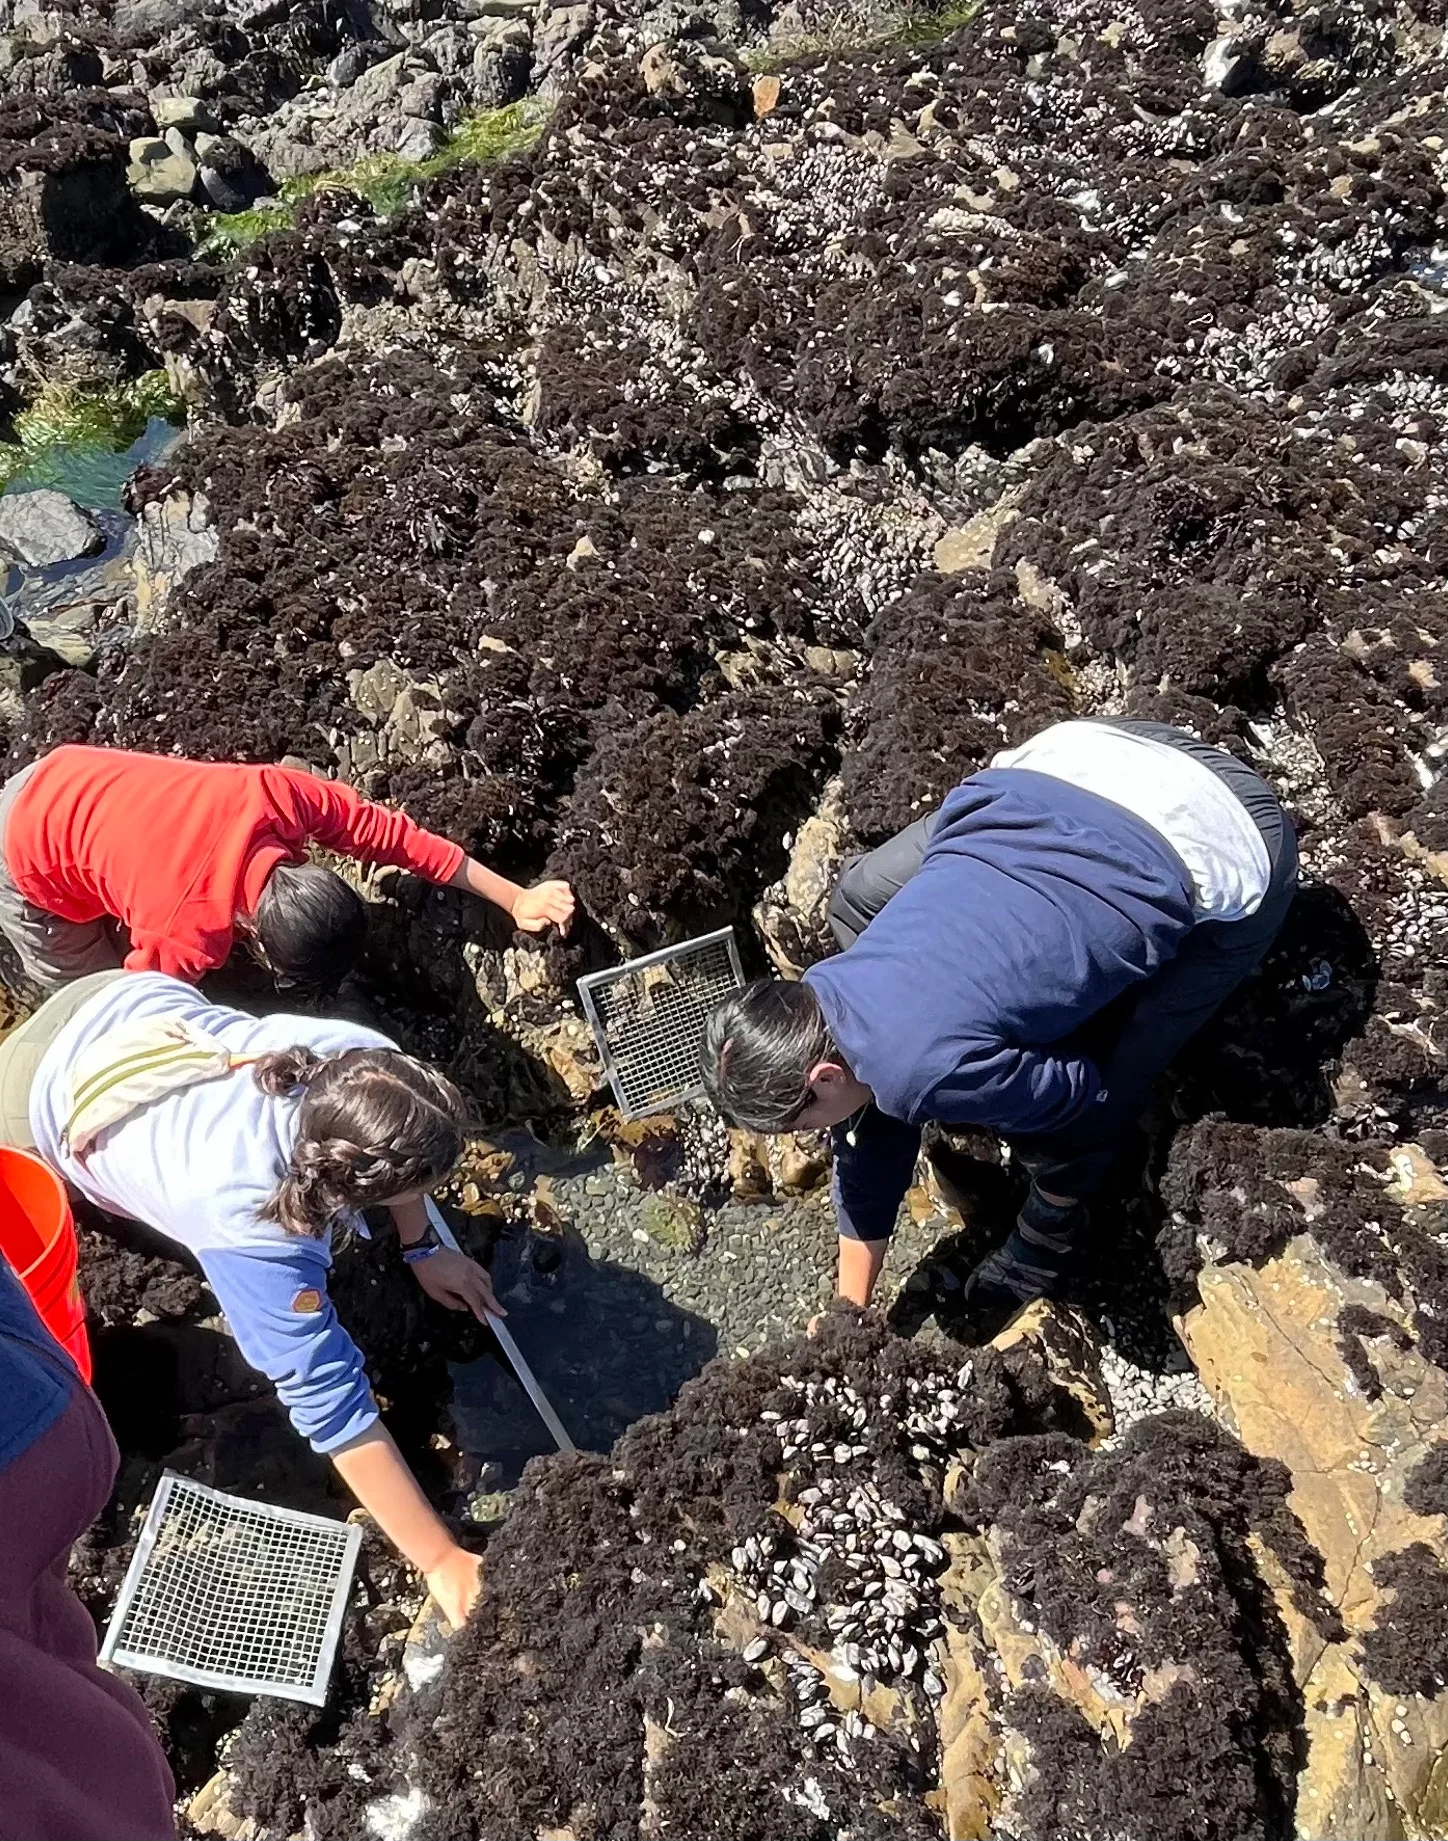 Emerson and classmates study the connection between sea urchin and competitor population sizes. (Courtesy Mia Emerson)